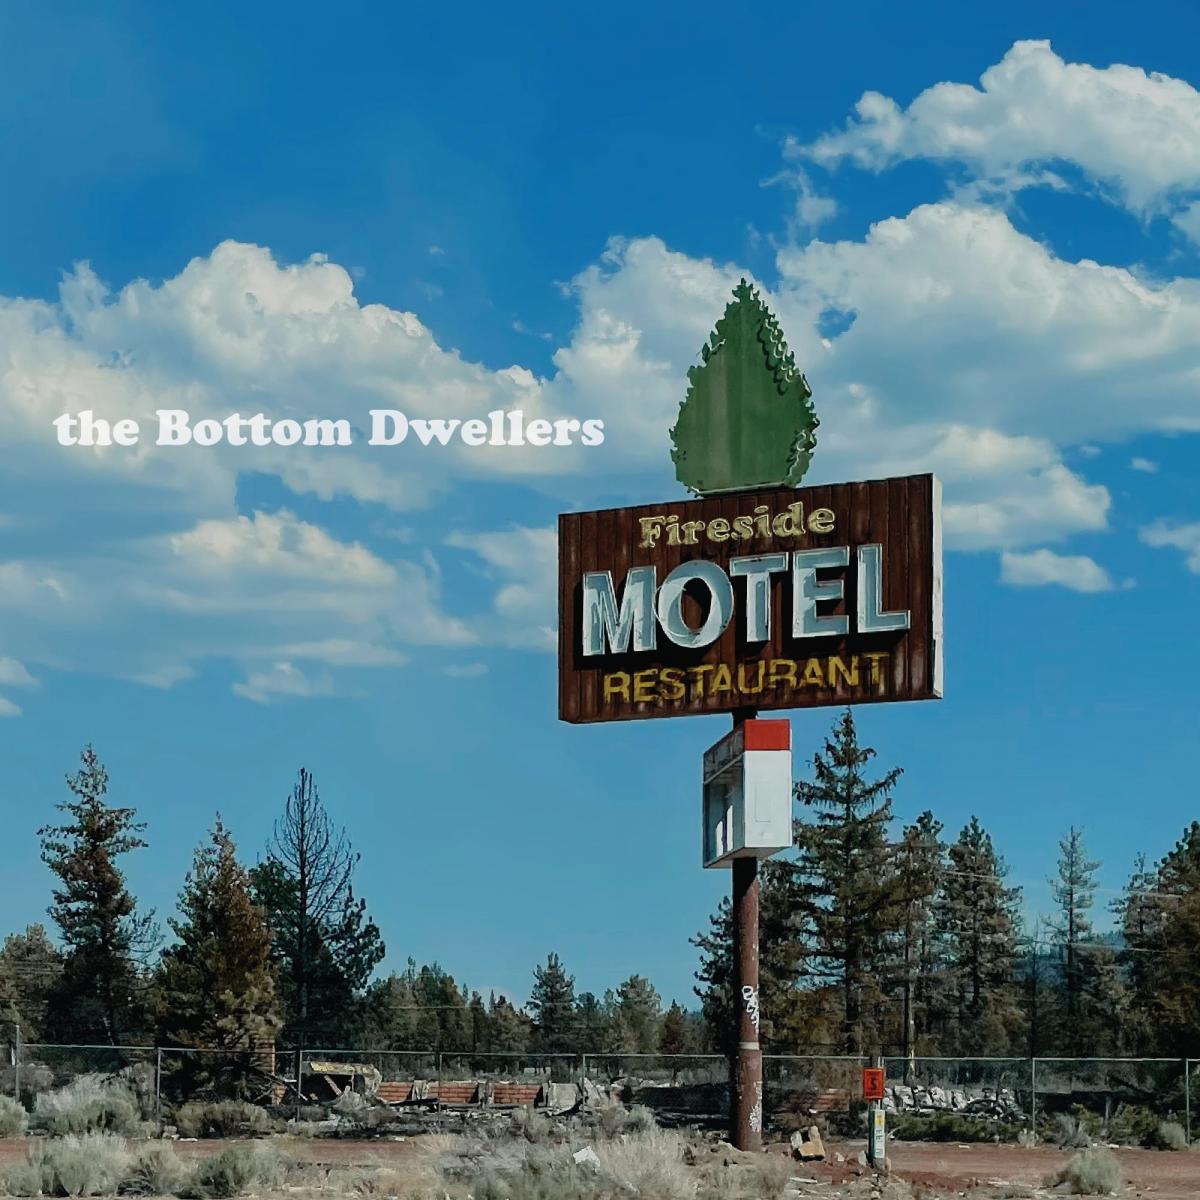 Fireside album cover by the Bottom Dwellers featuring a burned down abandoned hotel